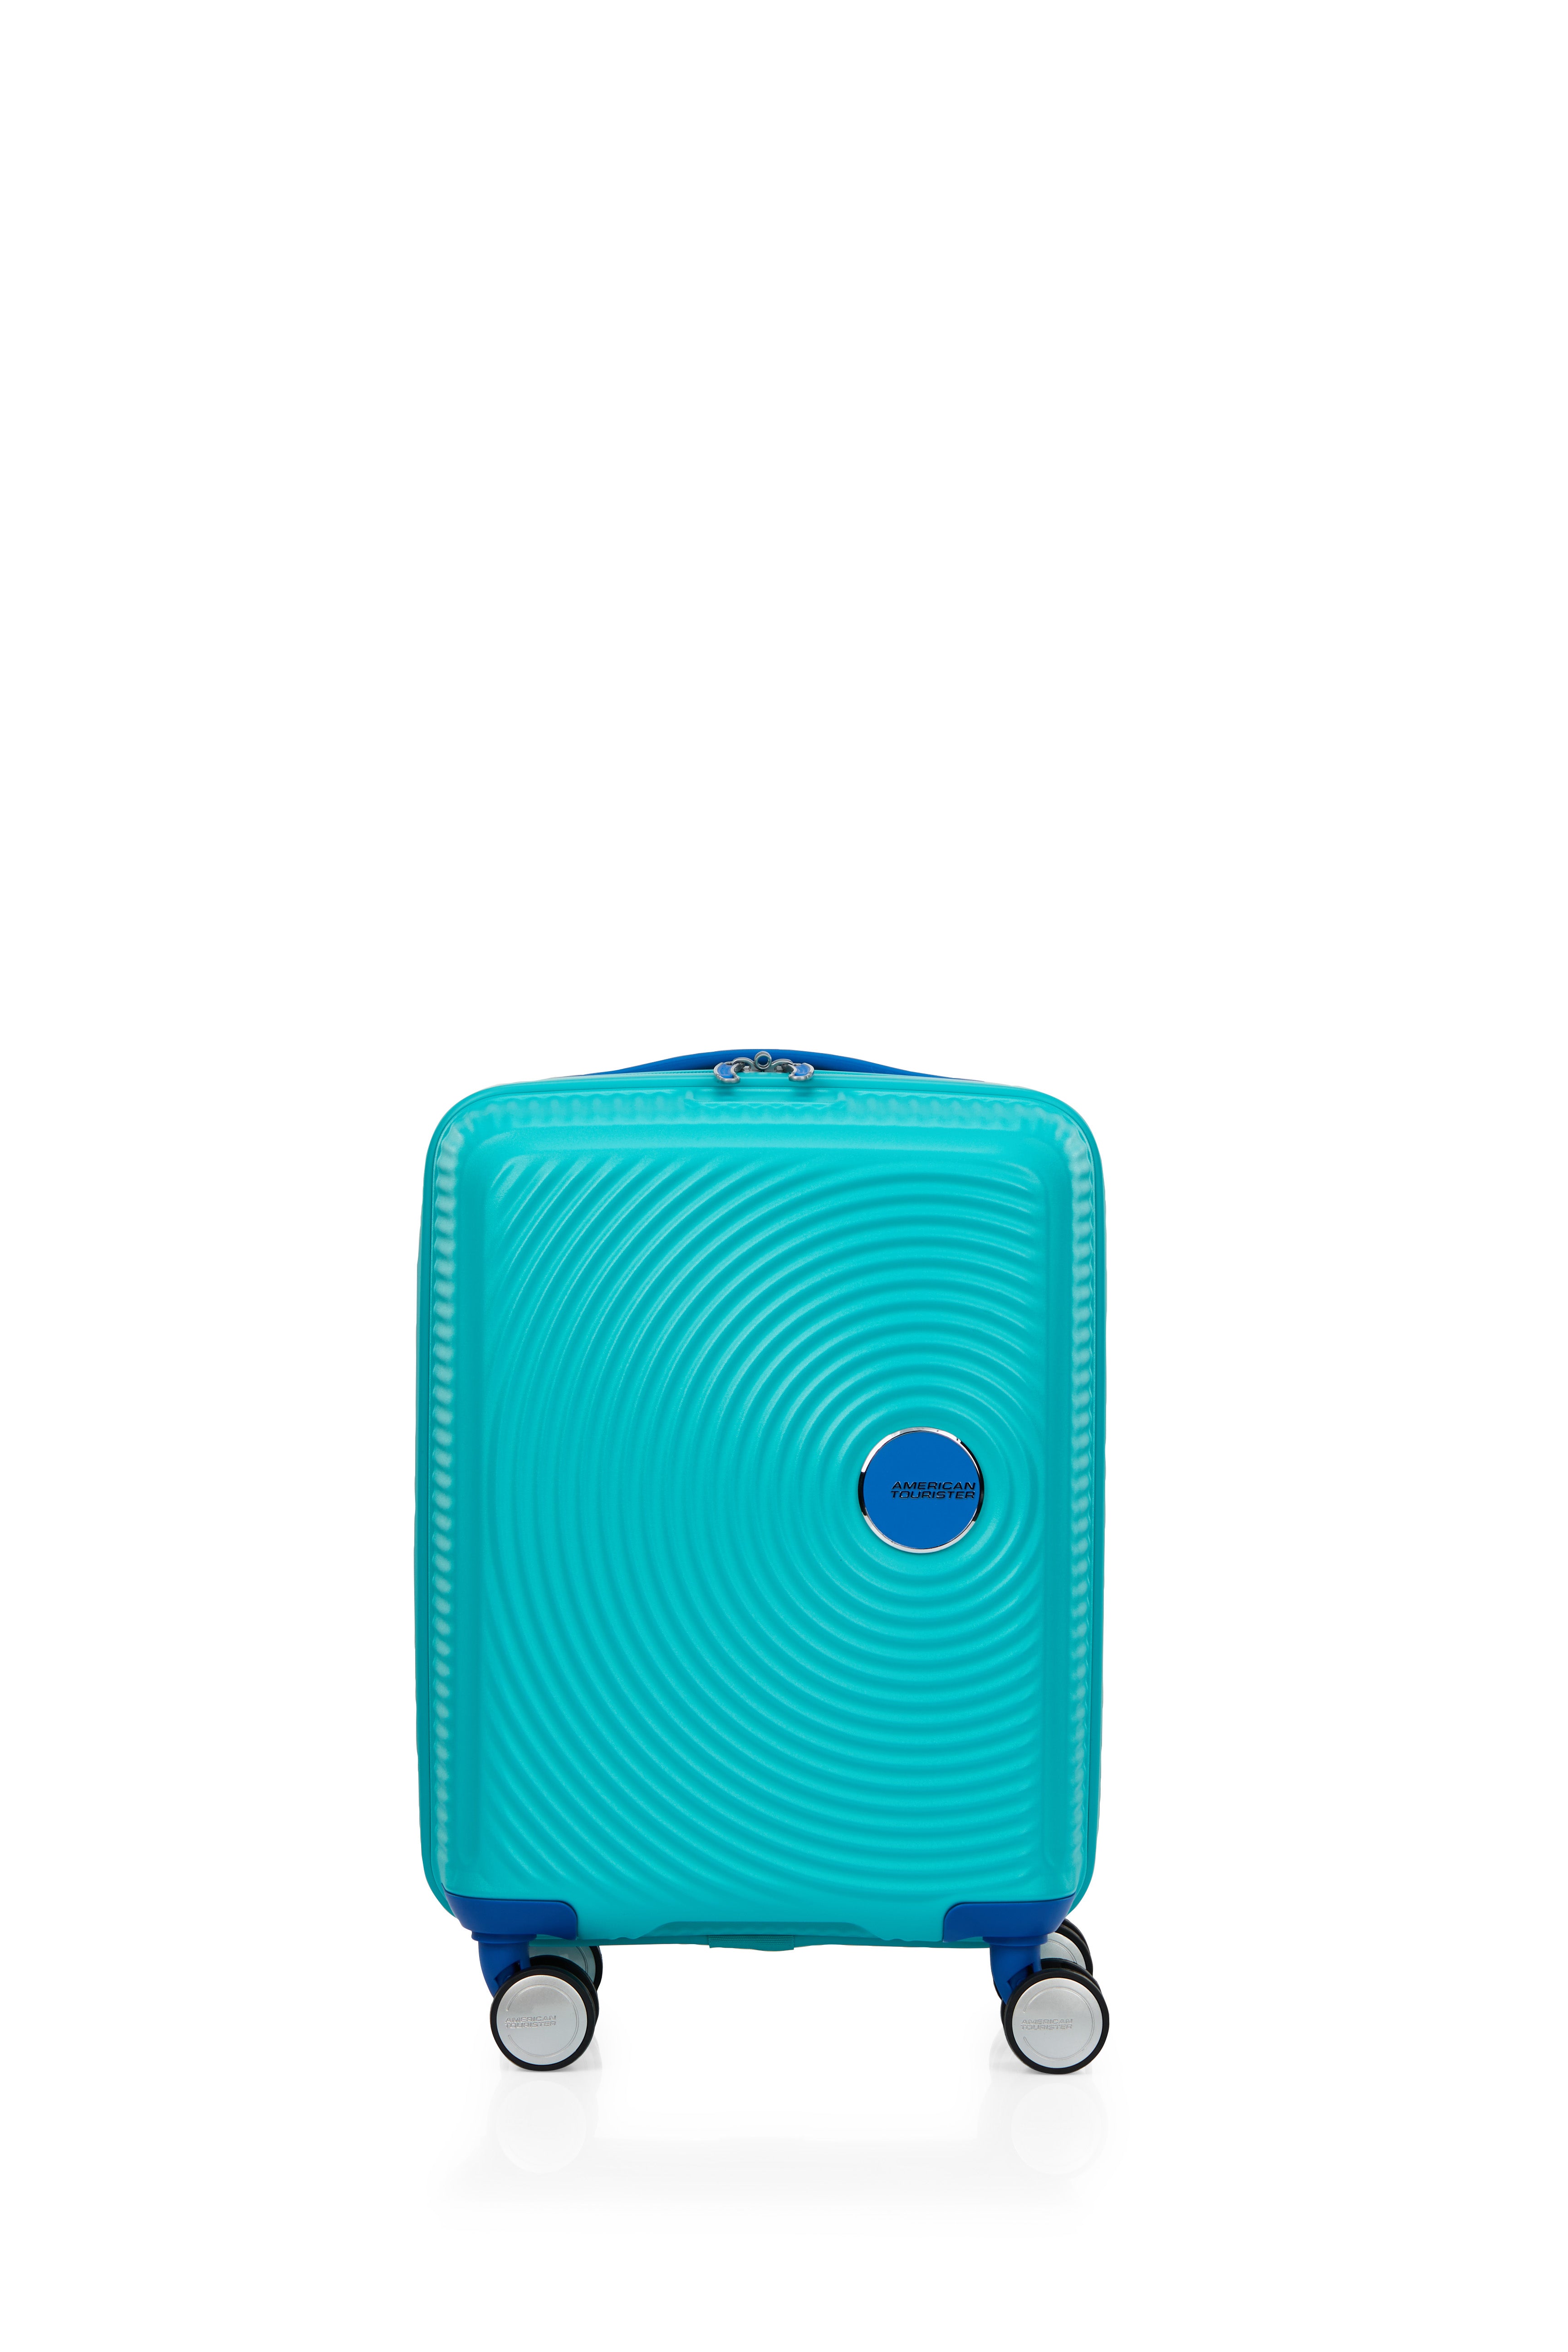 American Tourister - Little Curio 47cm Spinner - Teal/Blue